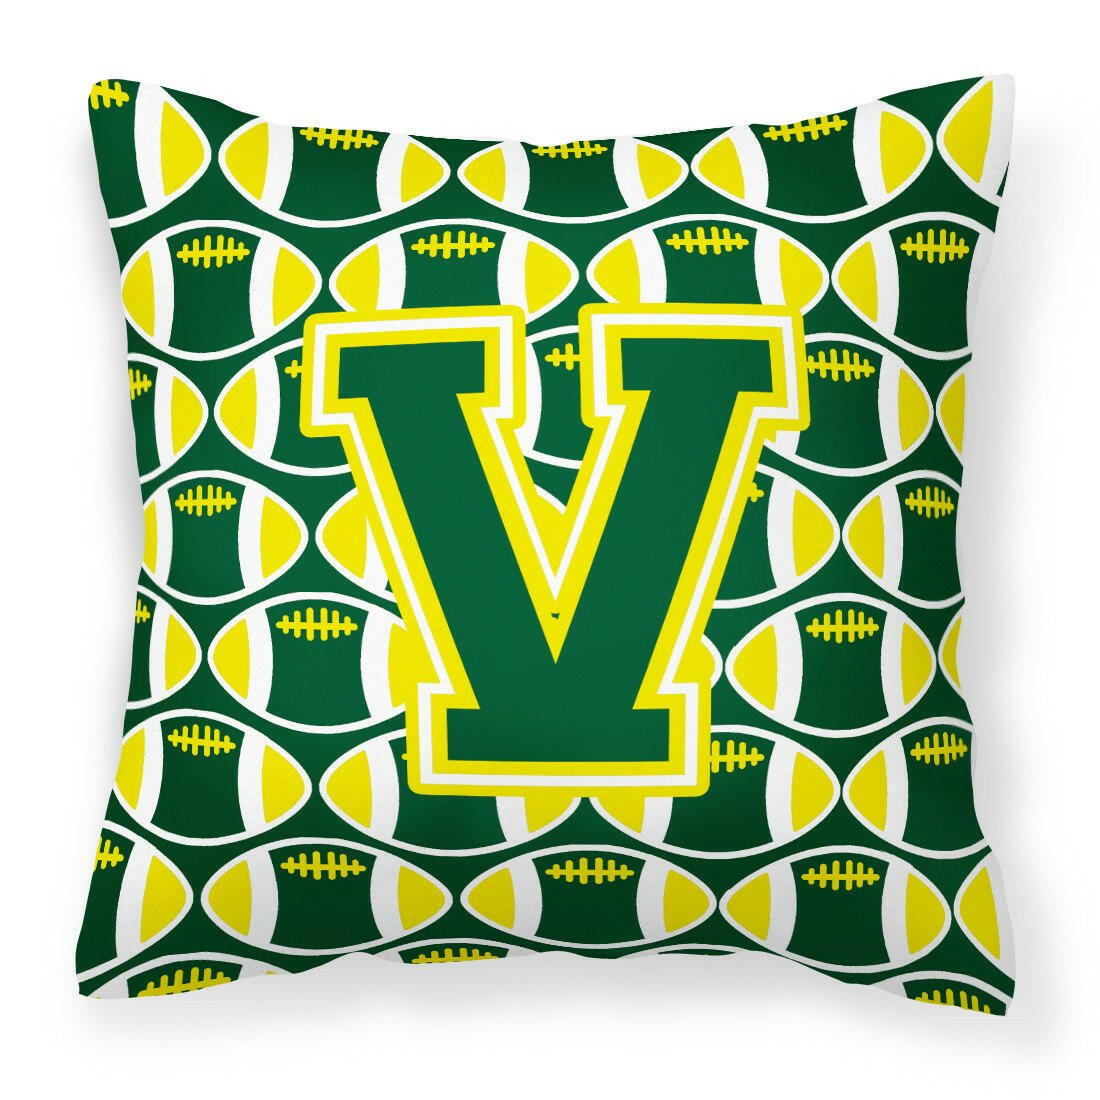 Letter V Football Green and Yellow Fabric Decorative Pillow CJ1075-VPW1414 by Caroline's Treasures